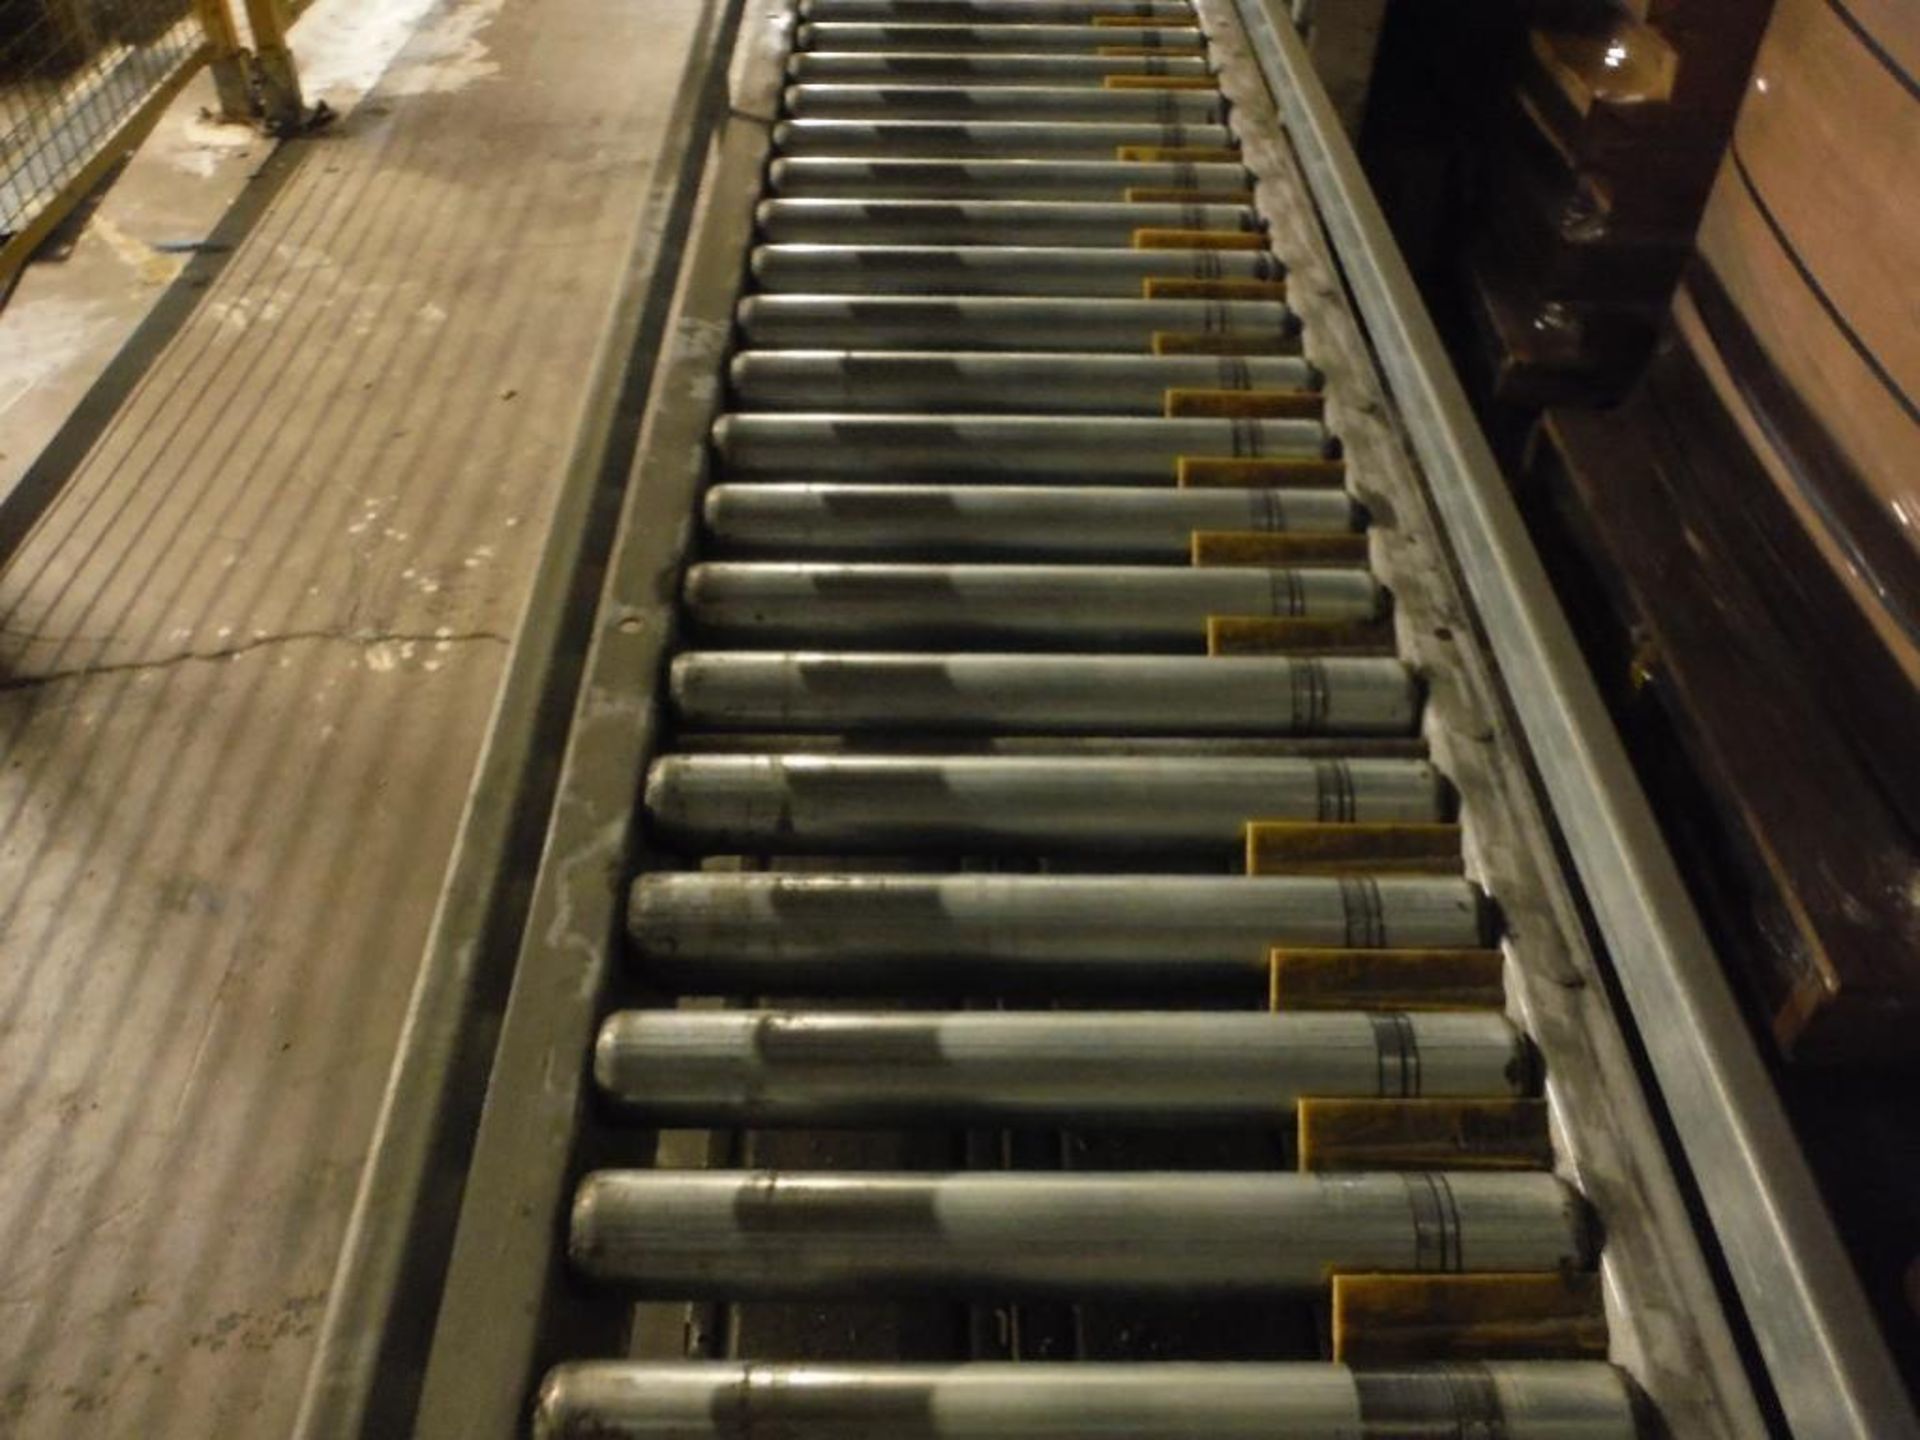 Hytrol powered roller conveyor, 80 ft. L x 15 in. W x 30 in. H, 3 drives. - RIGGING FEE FOR DOMESTIC - Image 3 of 6